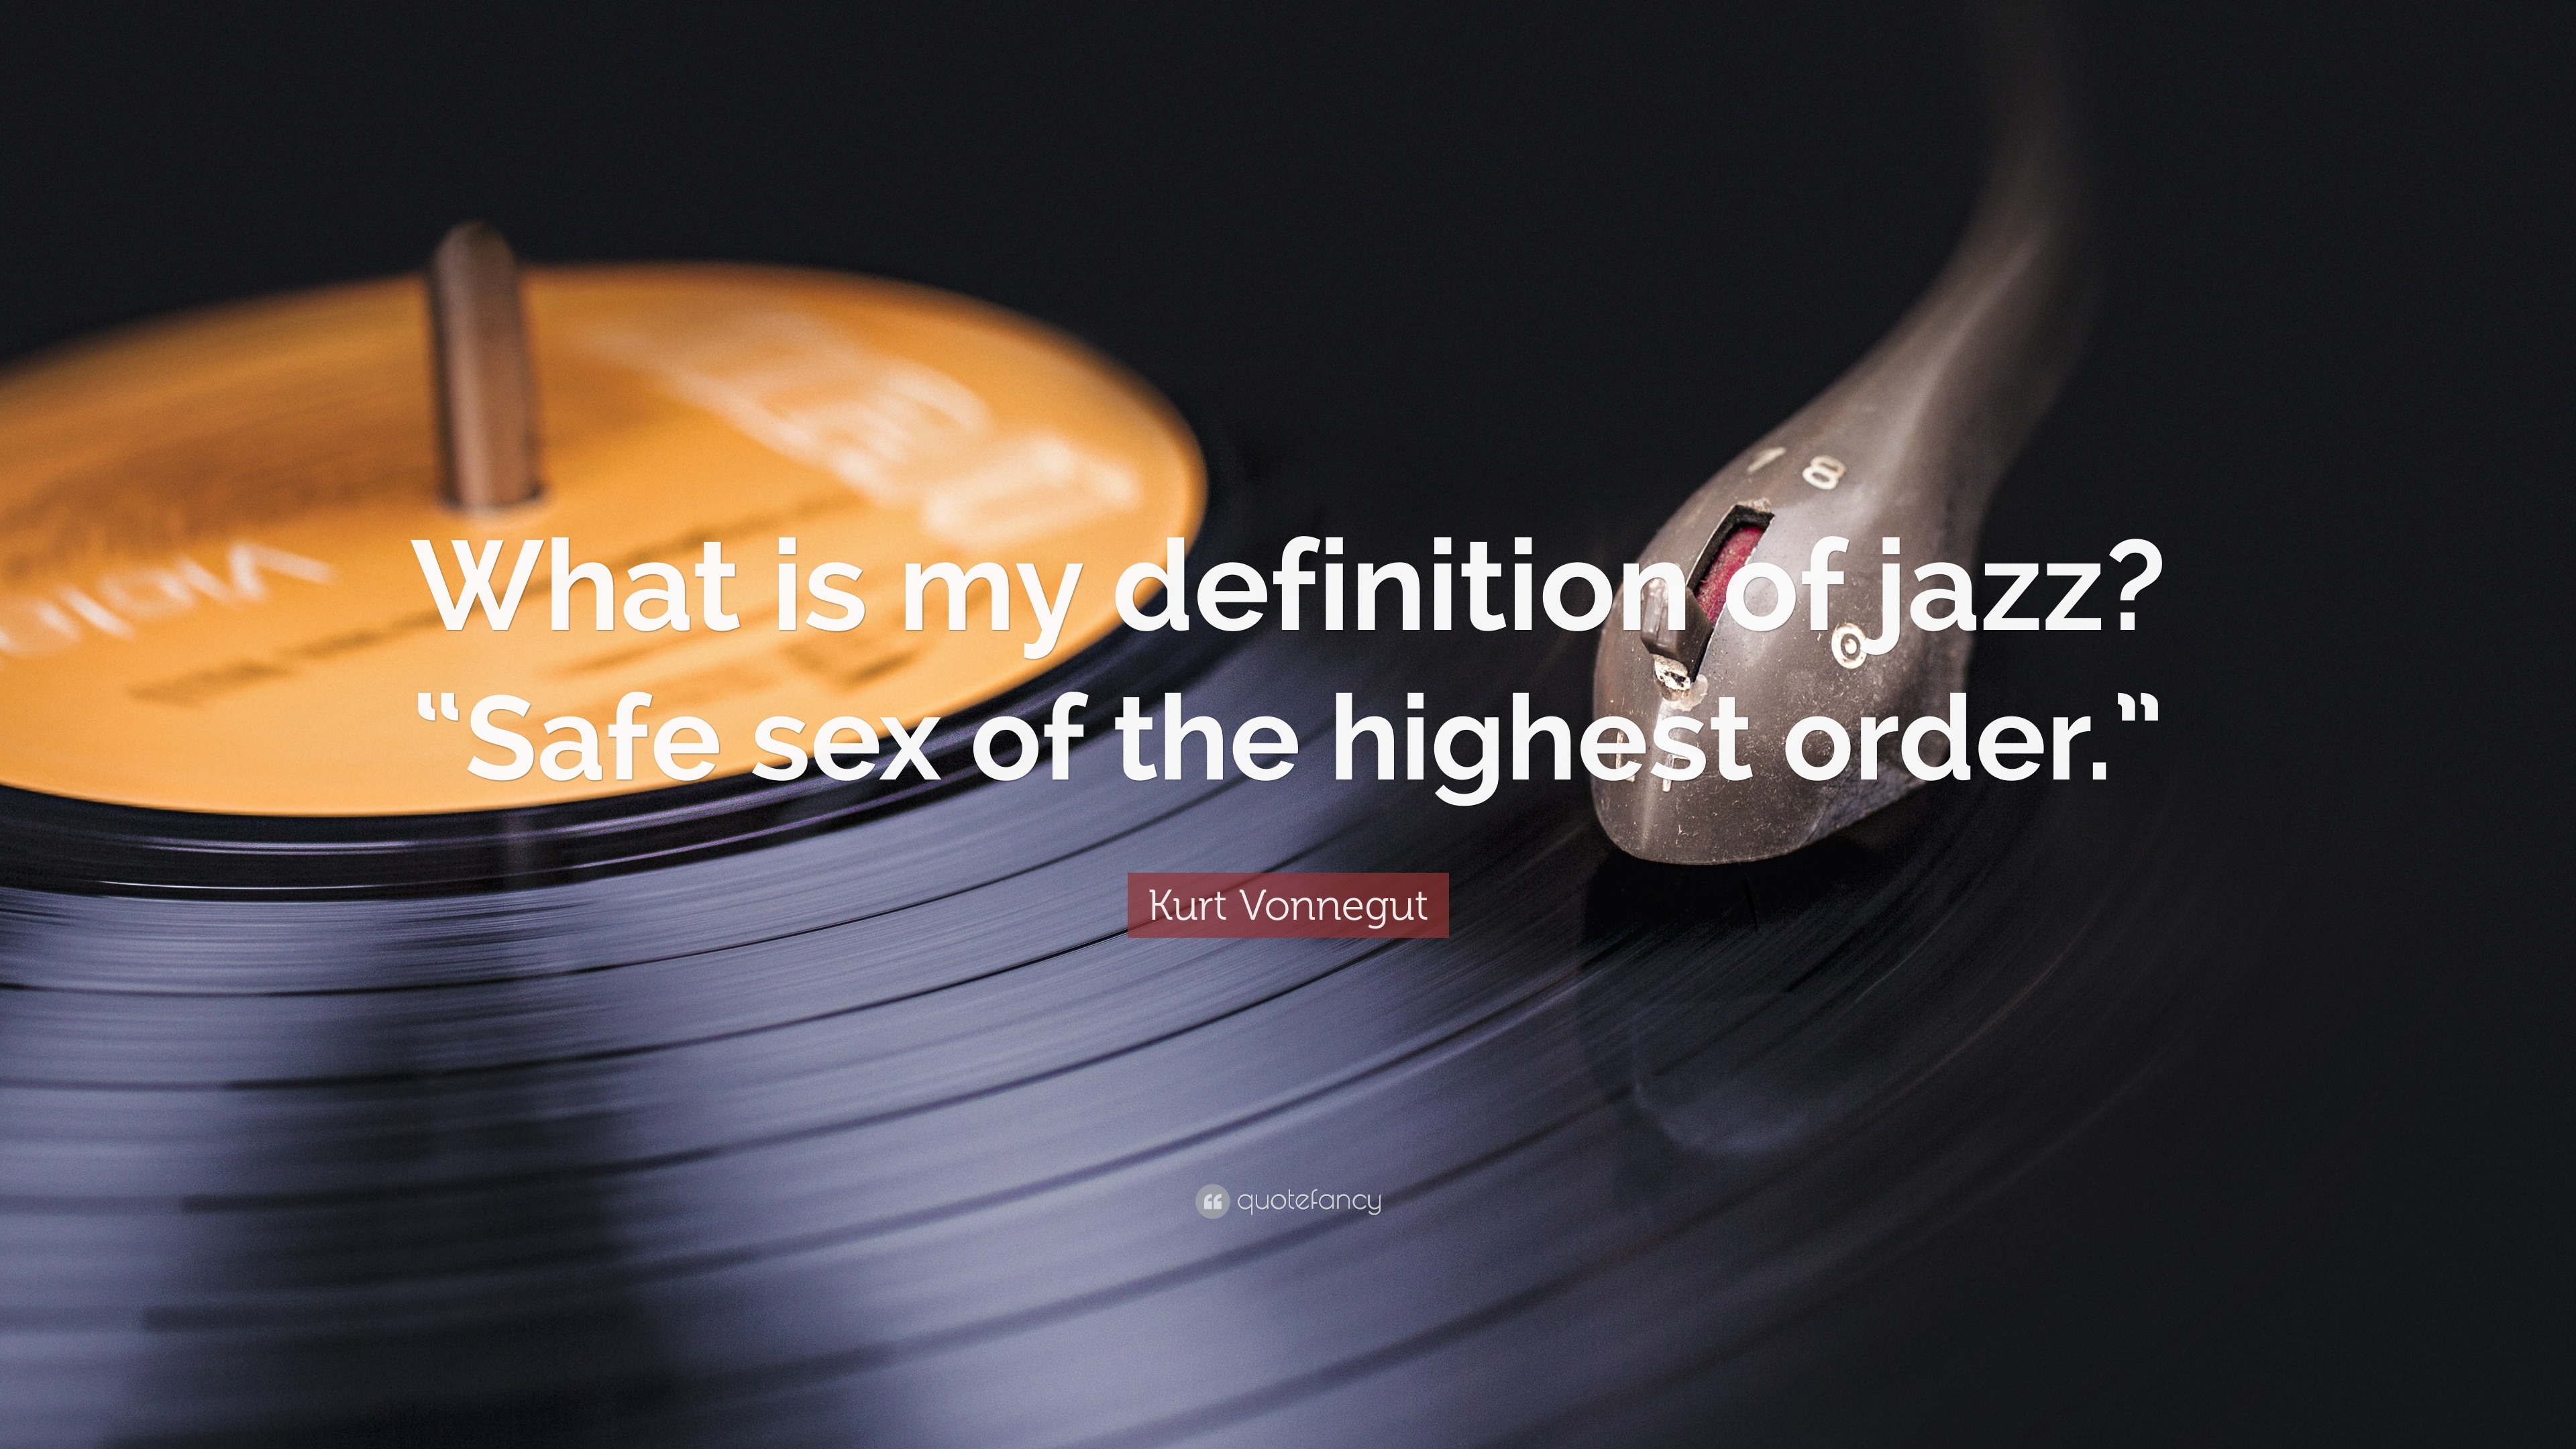 Kurt Vonnegut Quote “what Is My Definition Of Jazz “safe Sex Of The Highest Order ”” 10